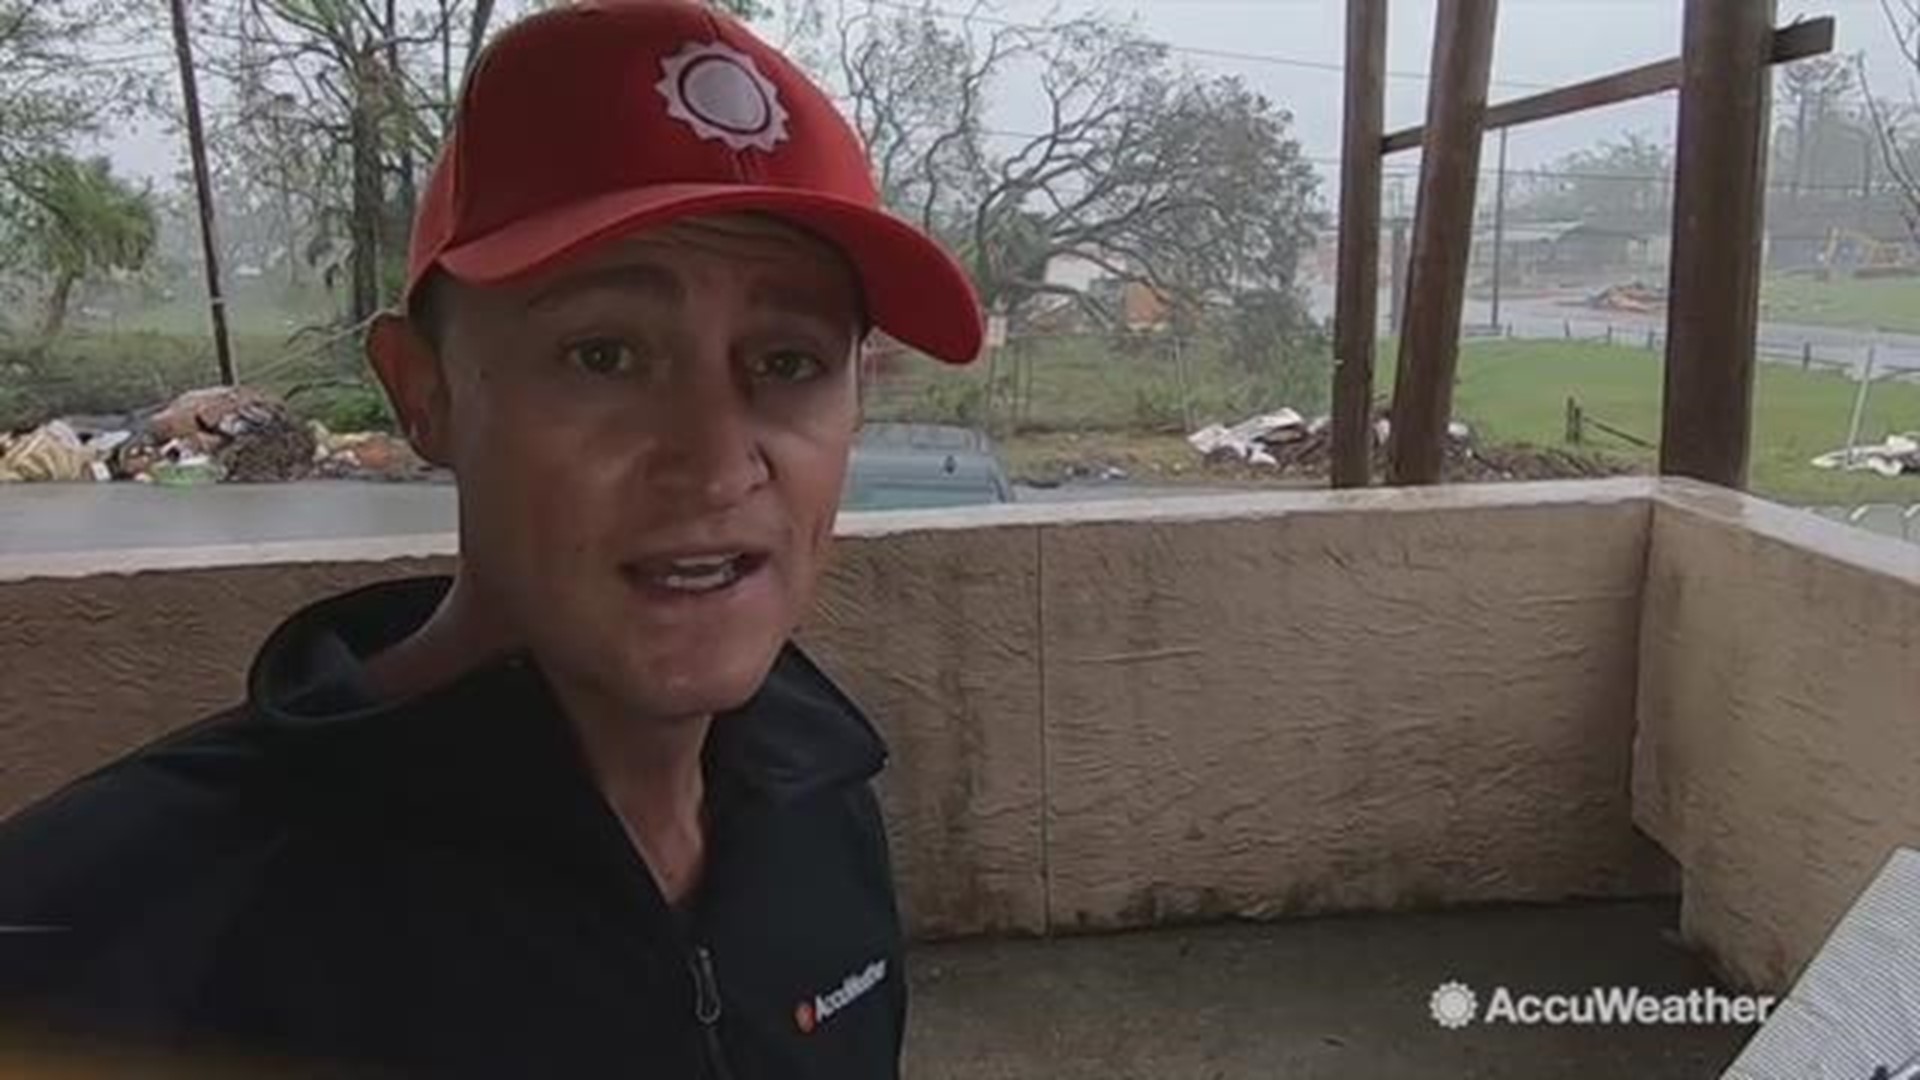 AccuWeather's Jonathan Petramala reports from Panama City, Florida as they get drenched by rain. This is the last thing they need. Despite all this, residents still make the most with what they can.